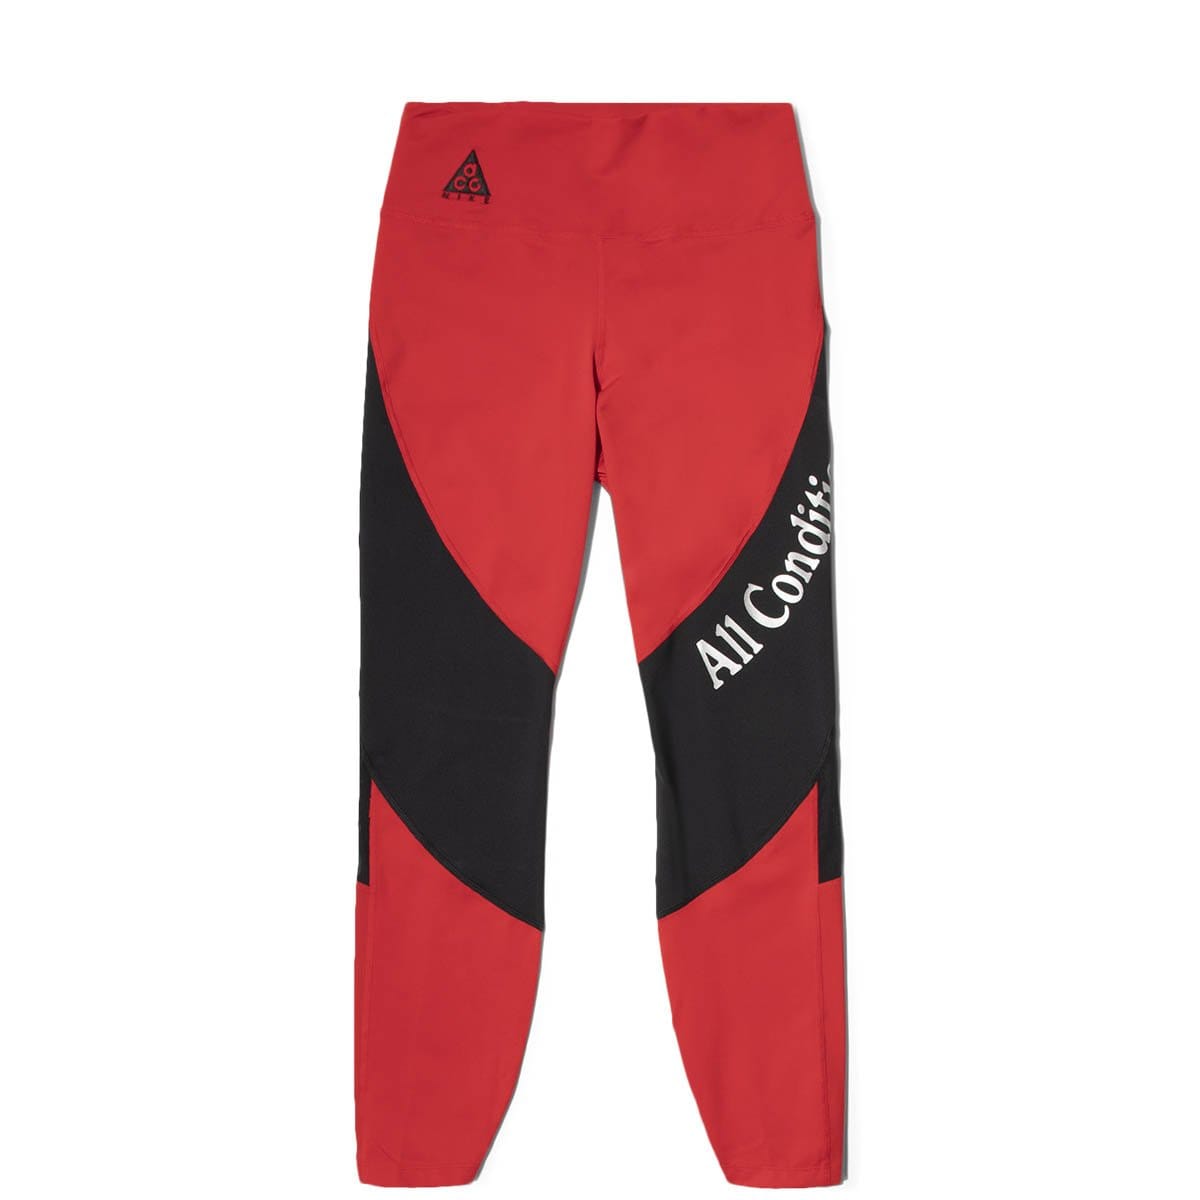 red nike bottoms